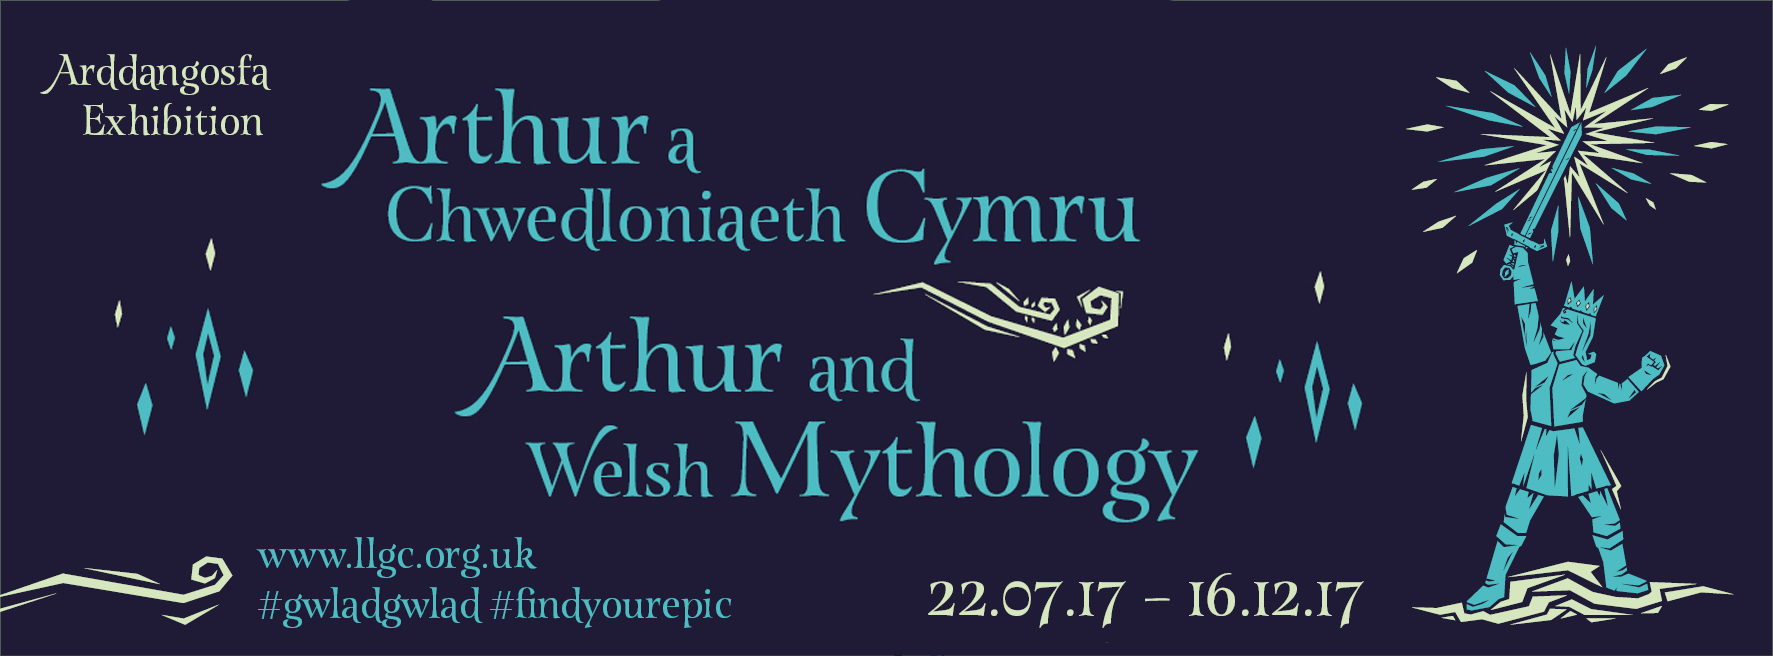 Arthur and Welsh Mythology, The National Library of Wales